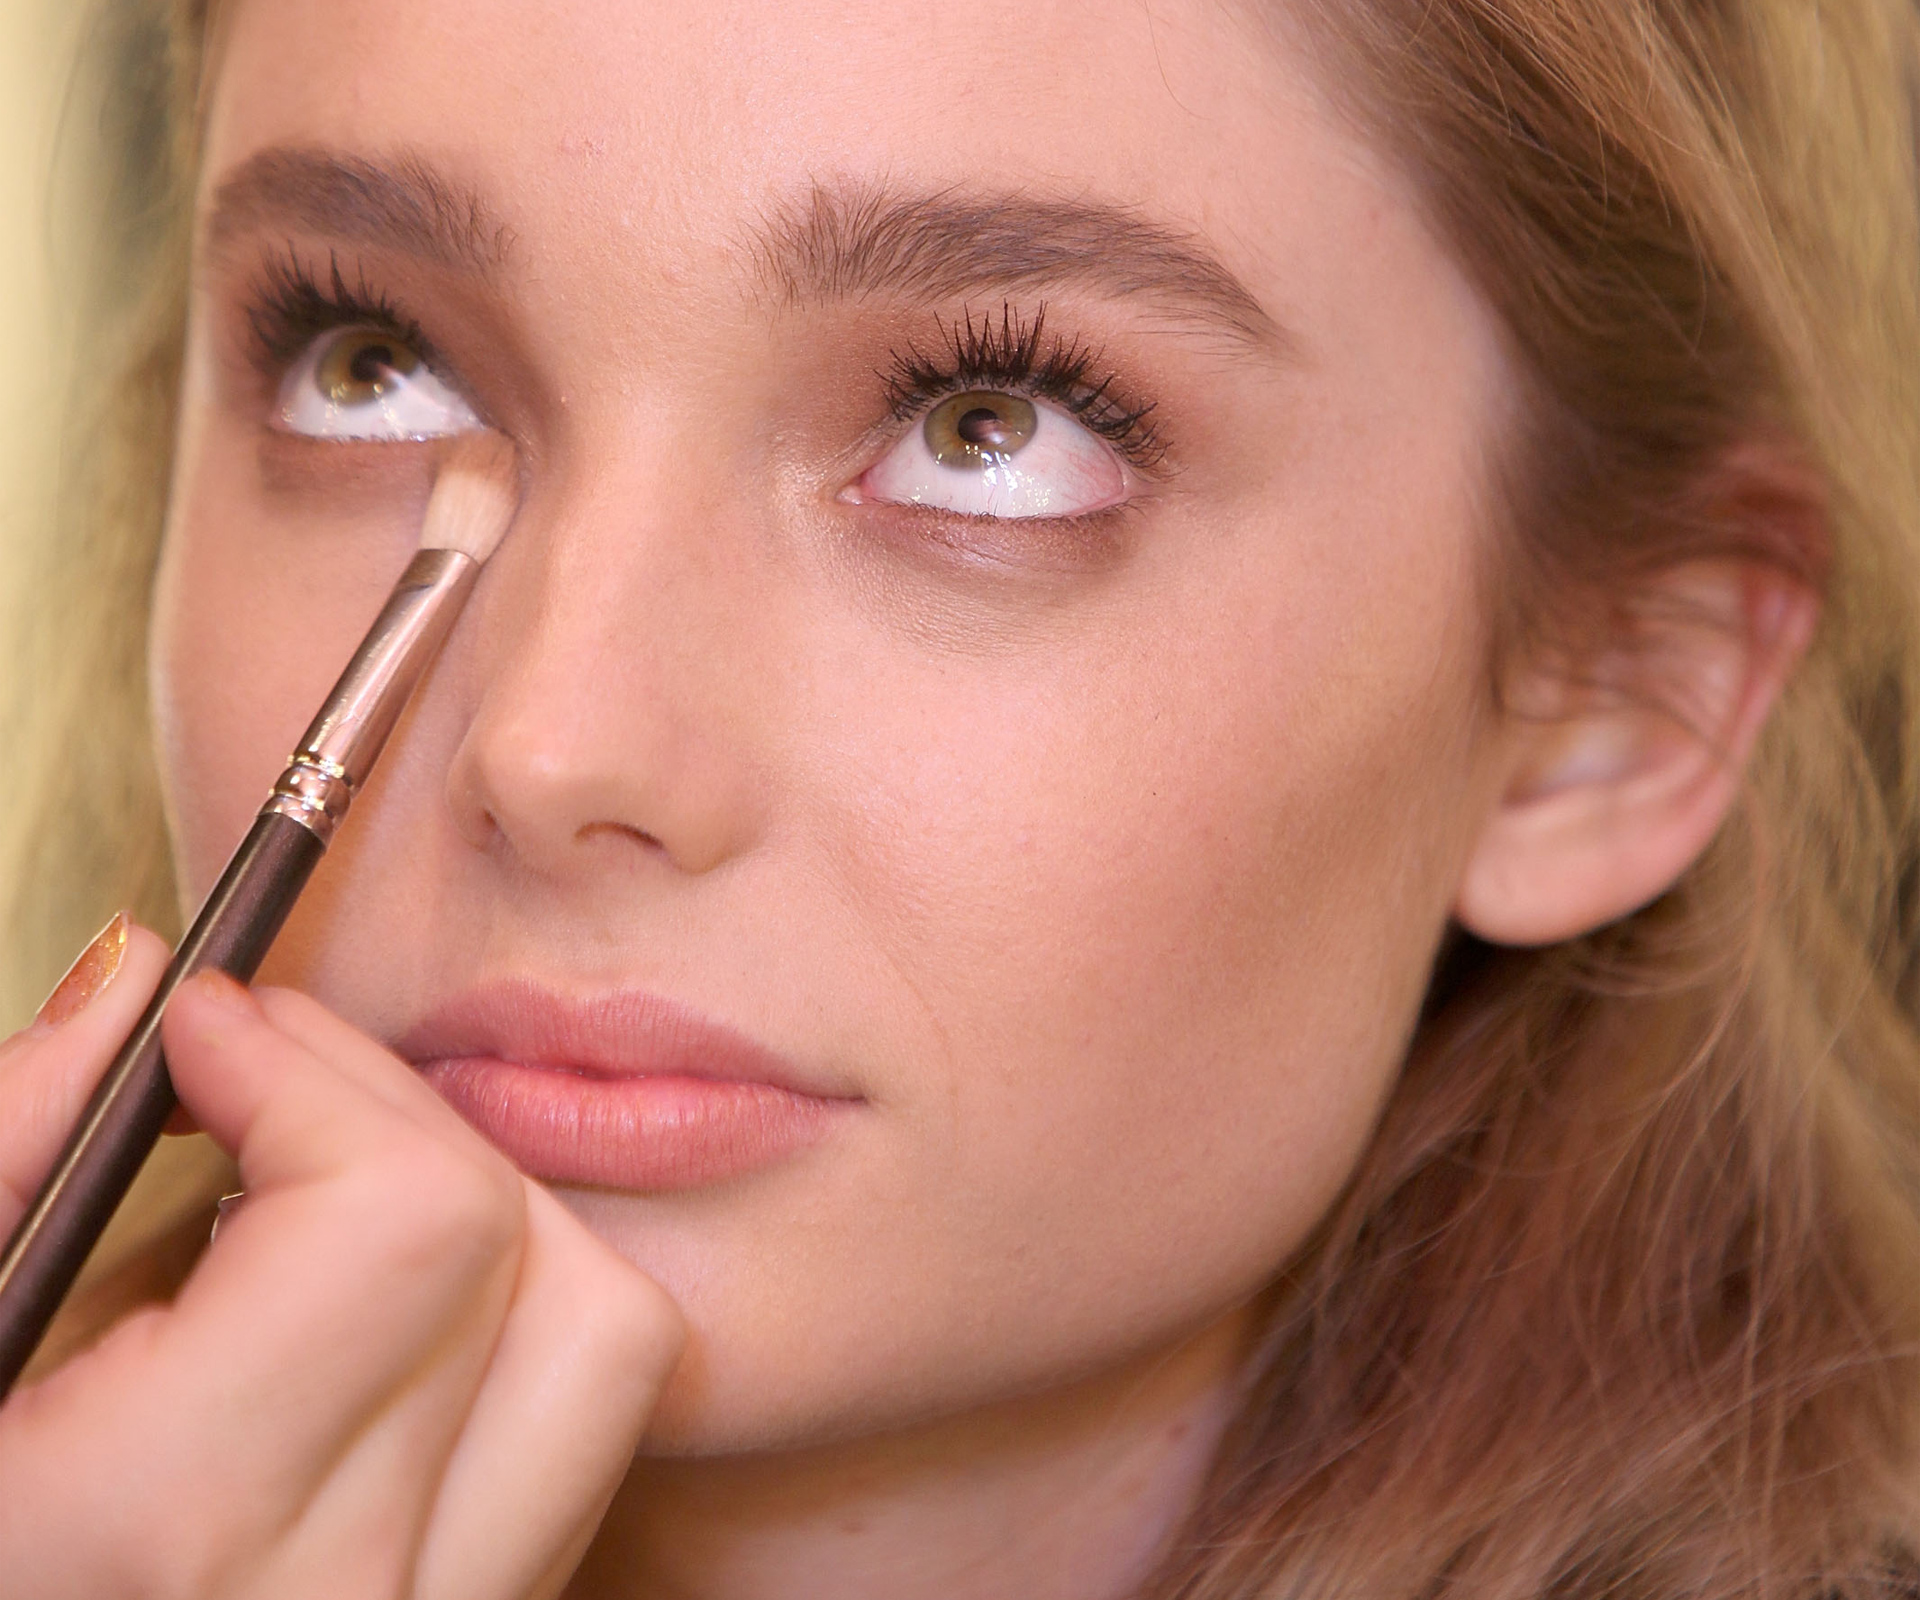 A beginner’s guide to a makeup routine